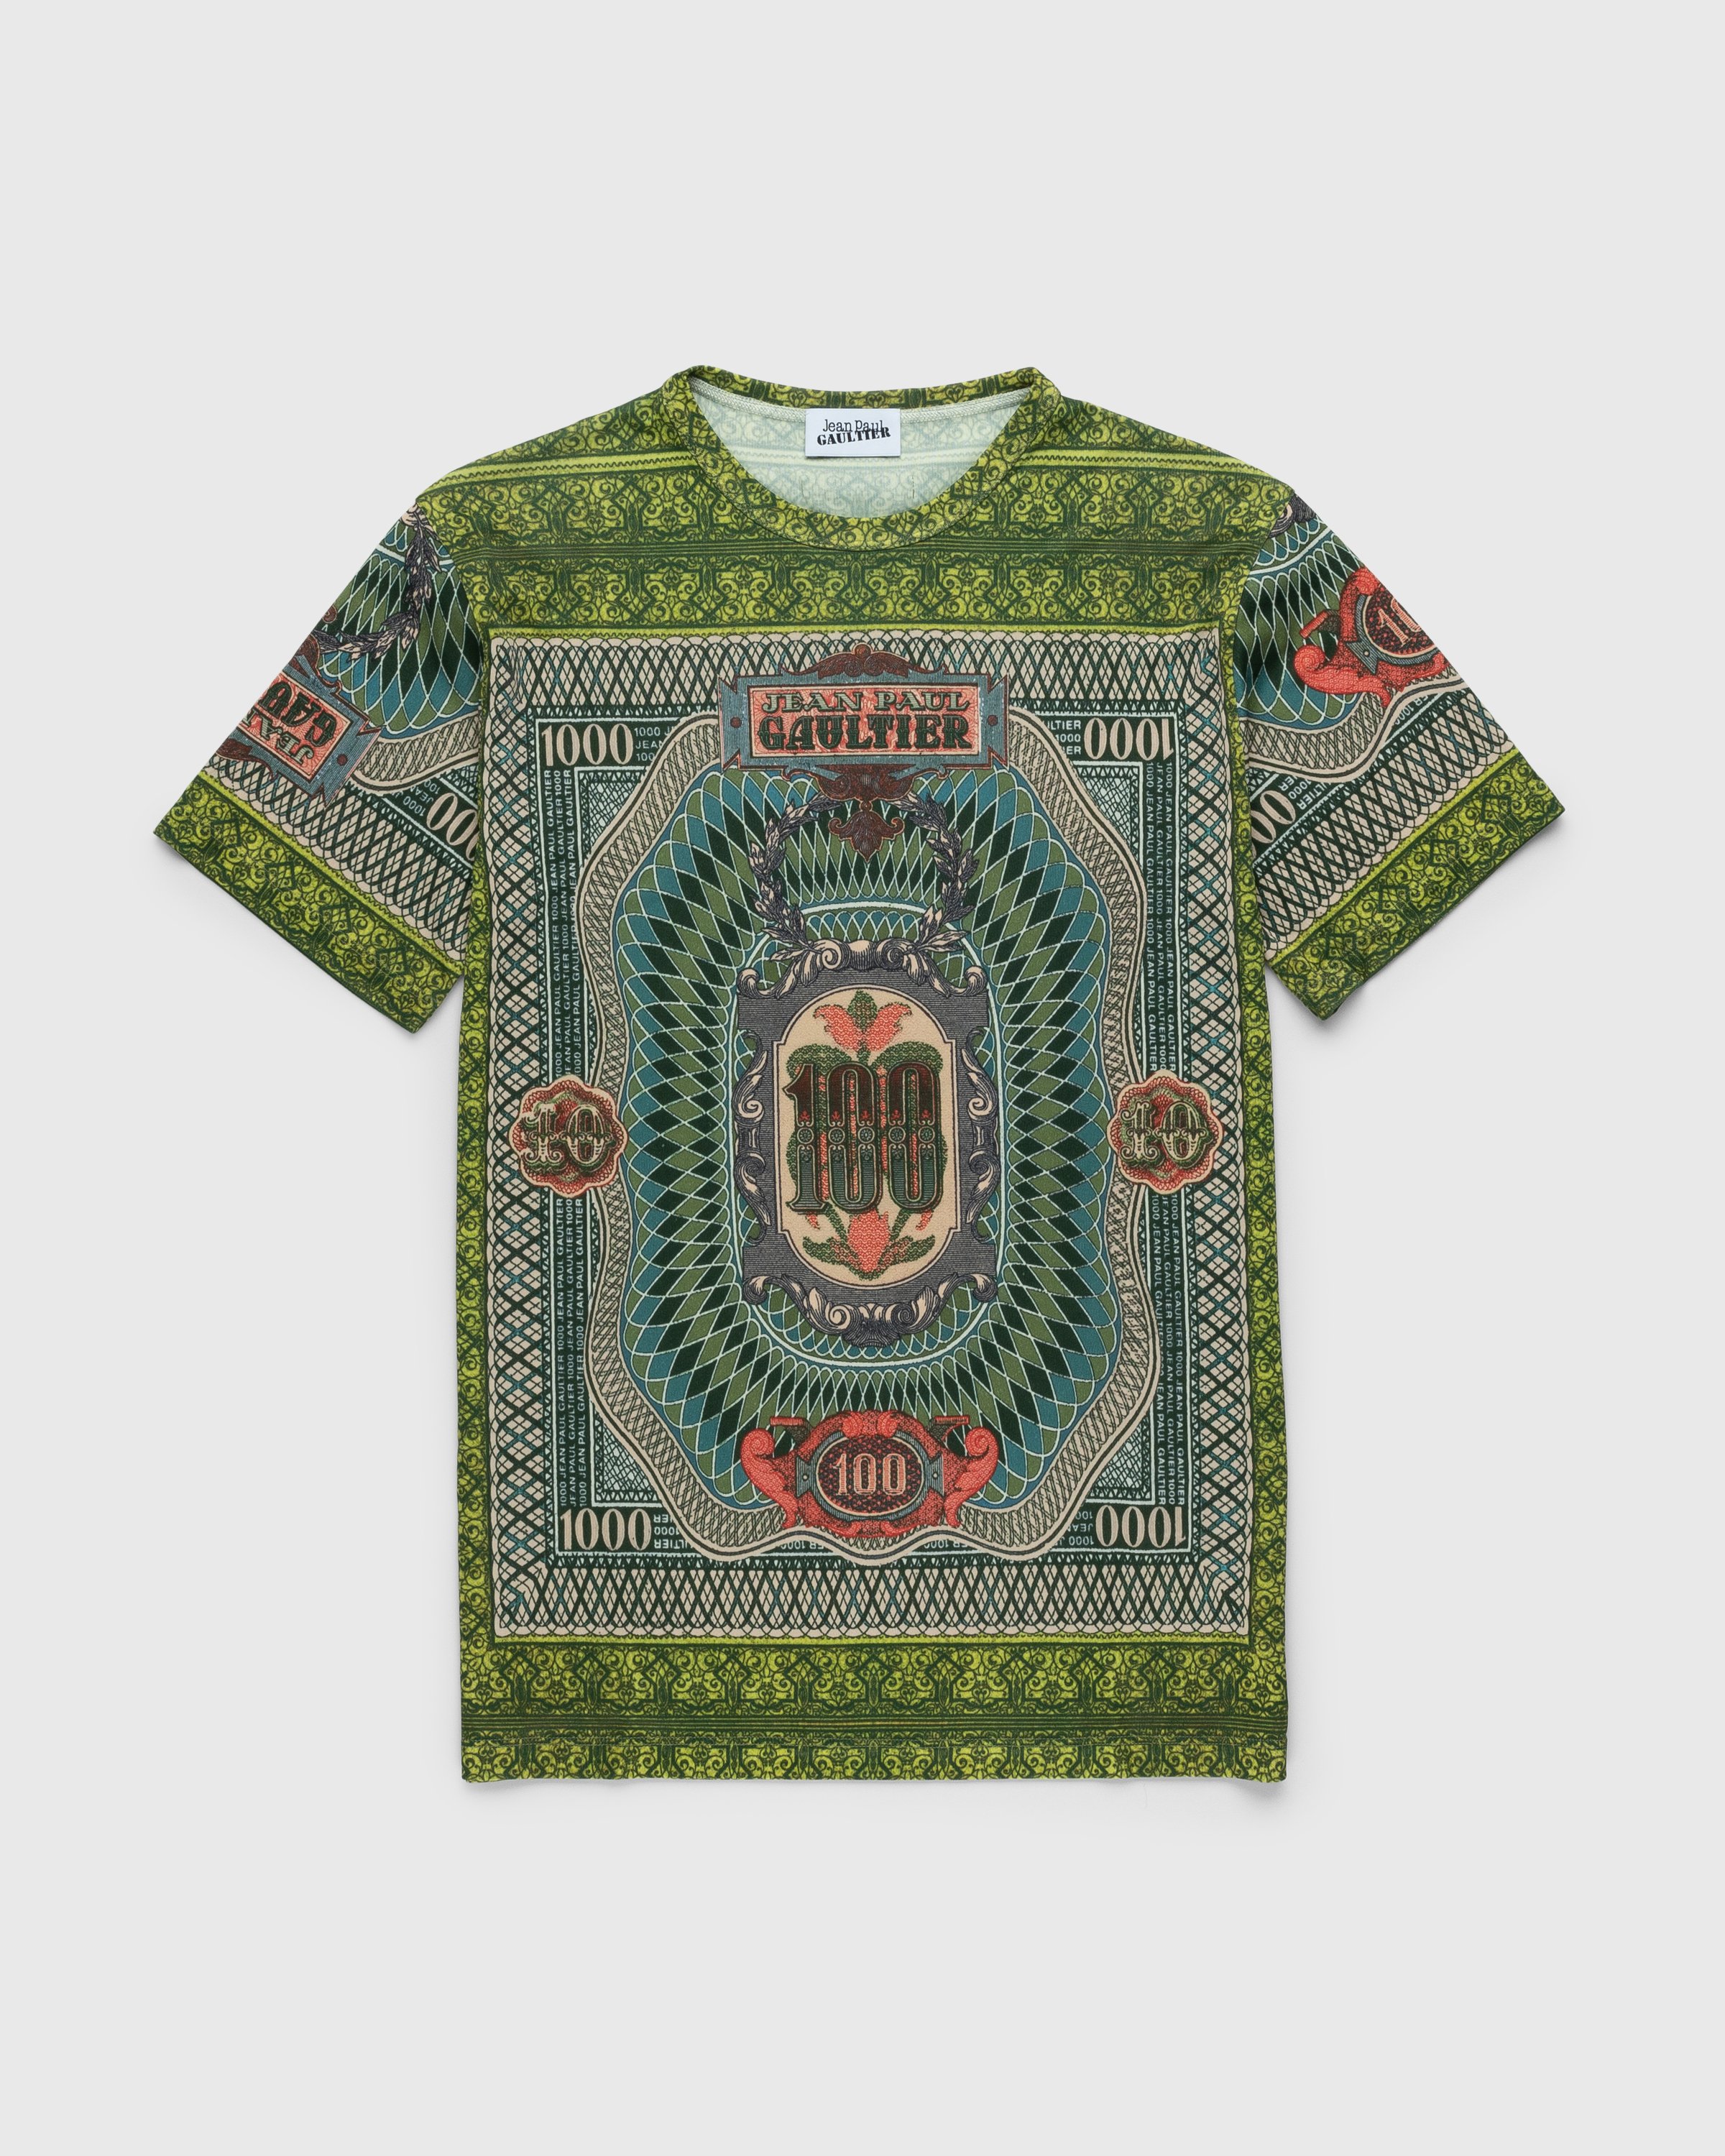 Jean Paul Gaultier - Banknote T-Shirt Multi - Clothing - Green - Image 1